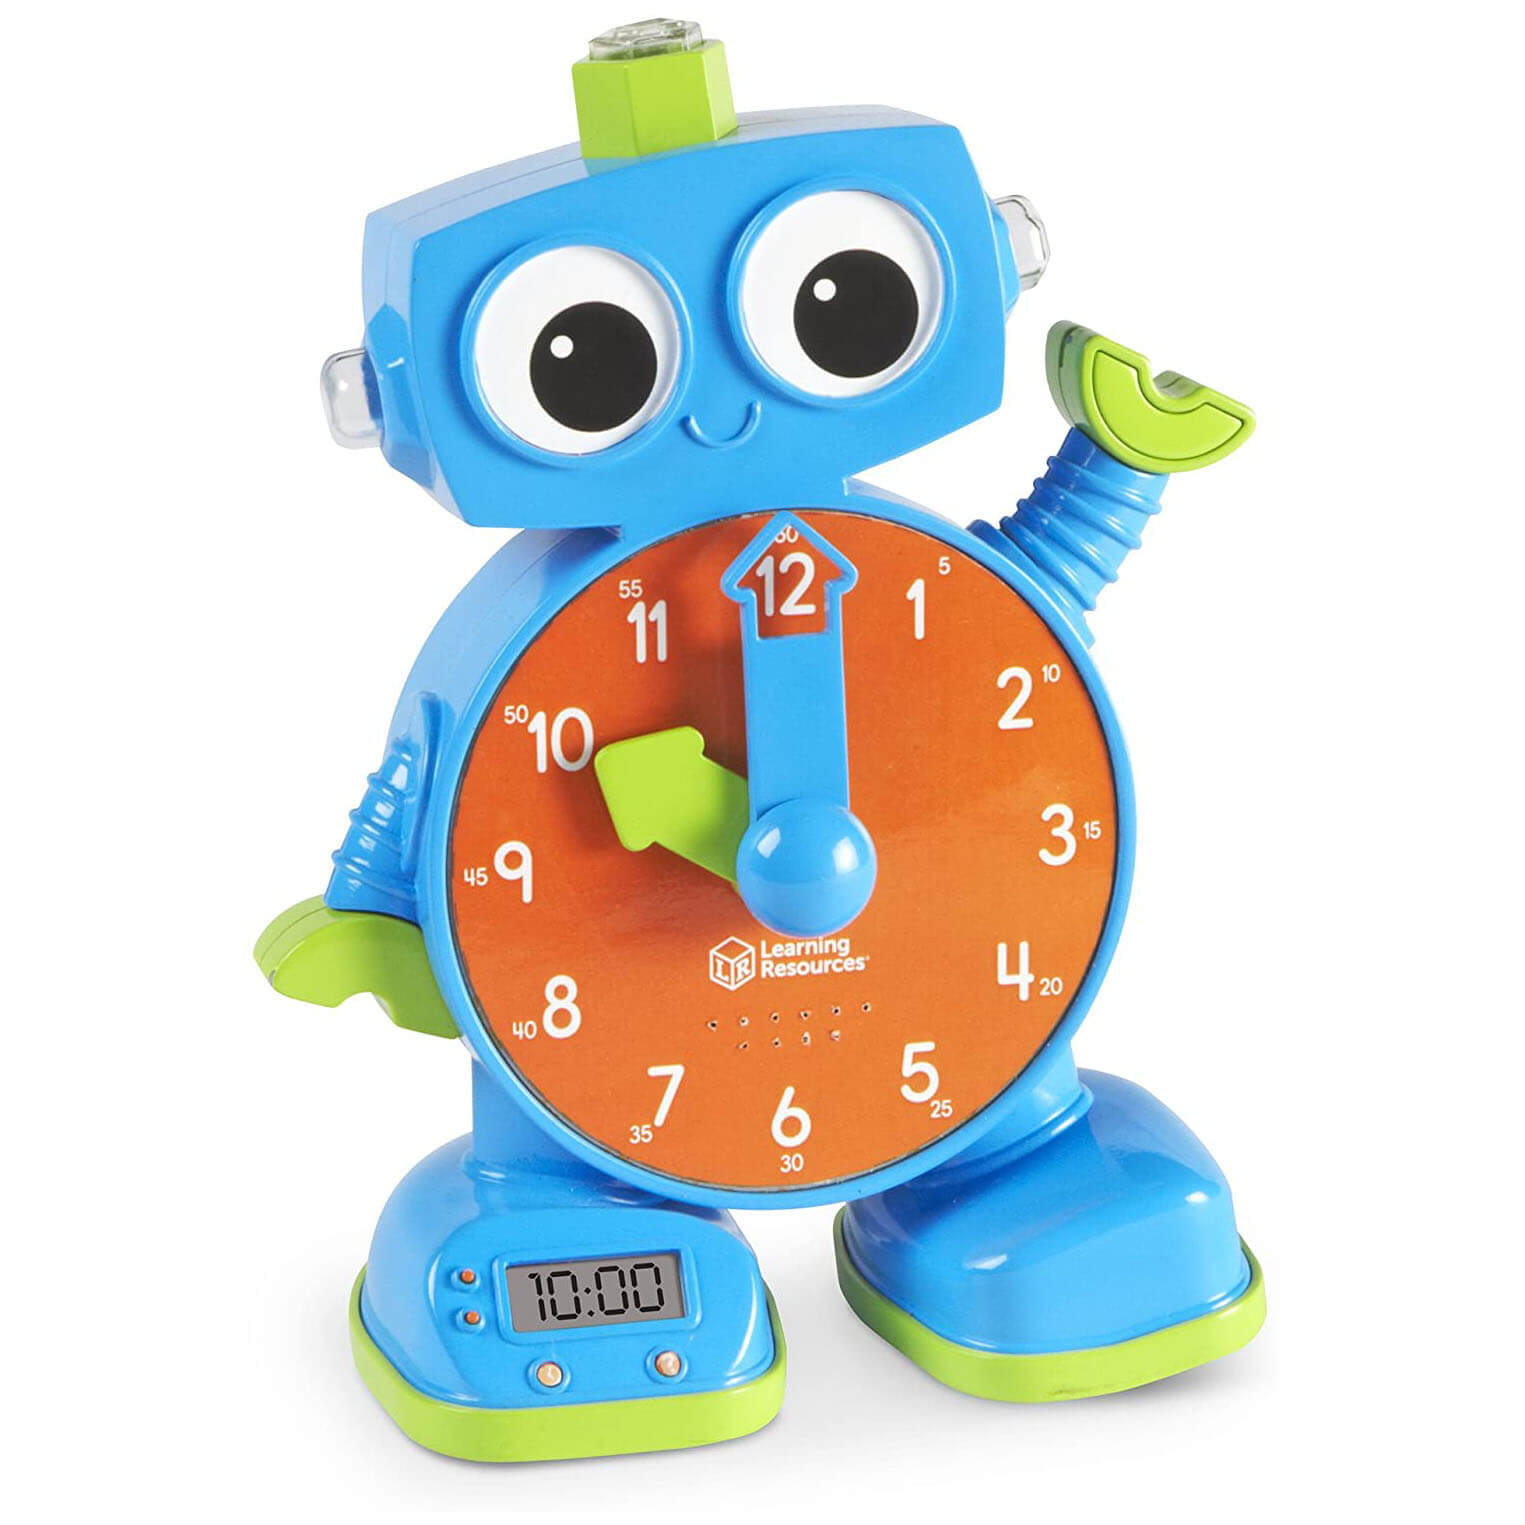 Learning Resources Tock the Learning Clock Robot